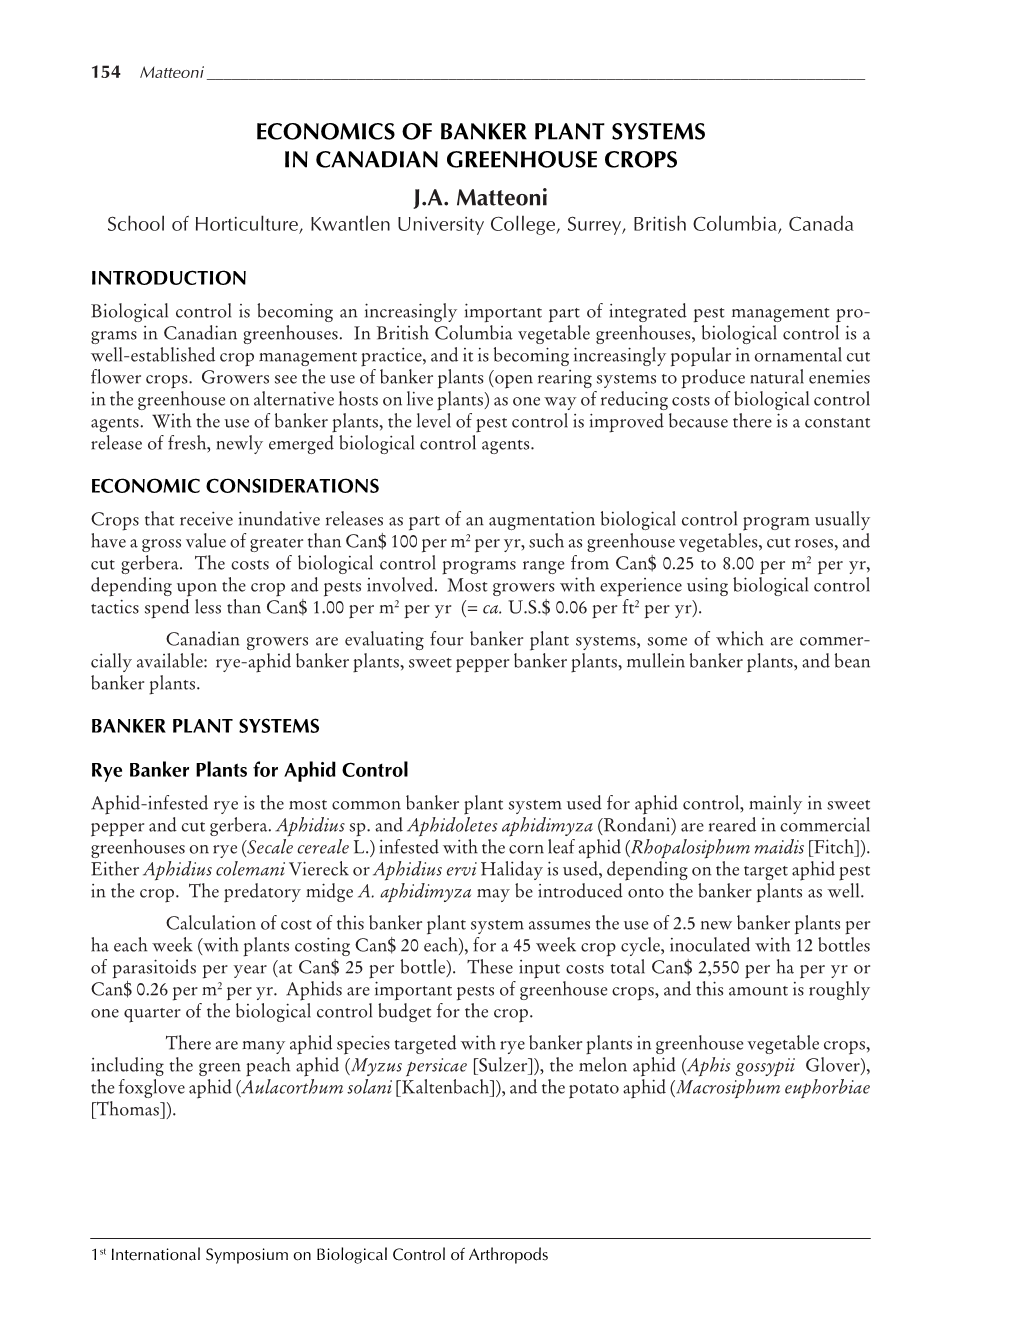 Economics of Banker Plant Systems in Canadian Greenhouse Crops J.A